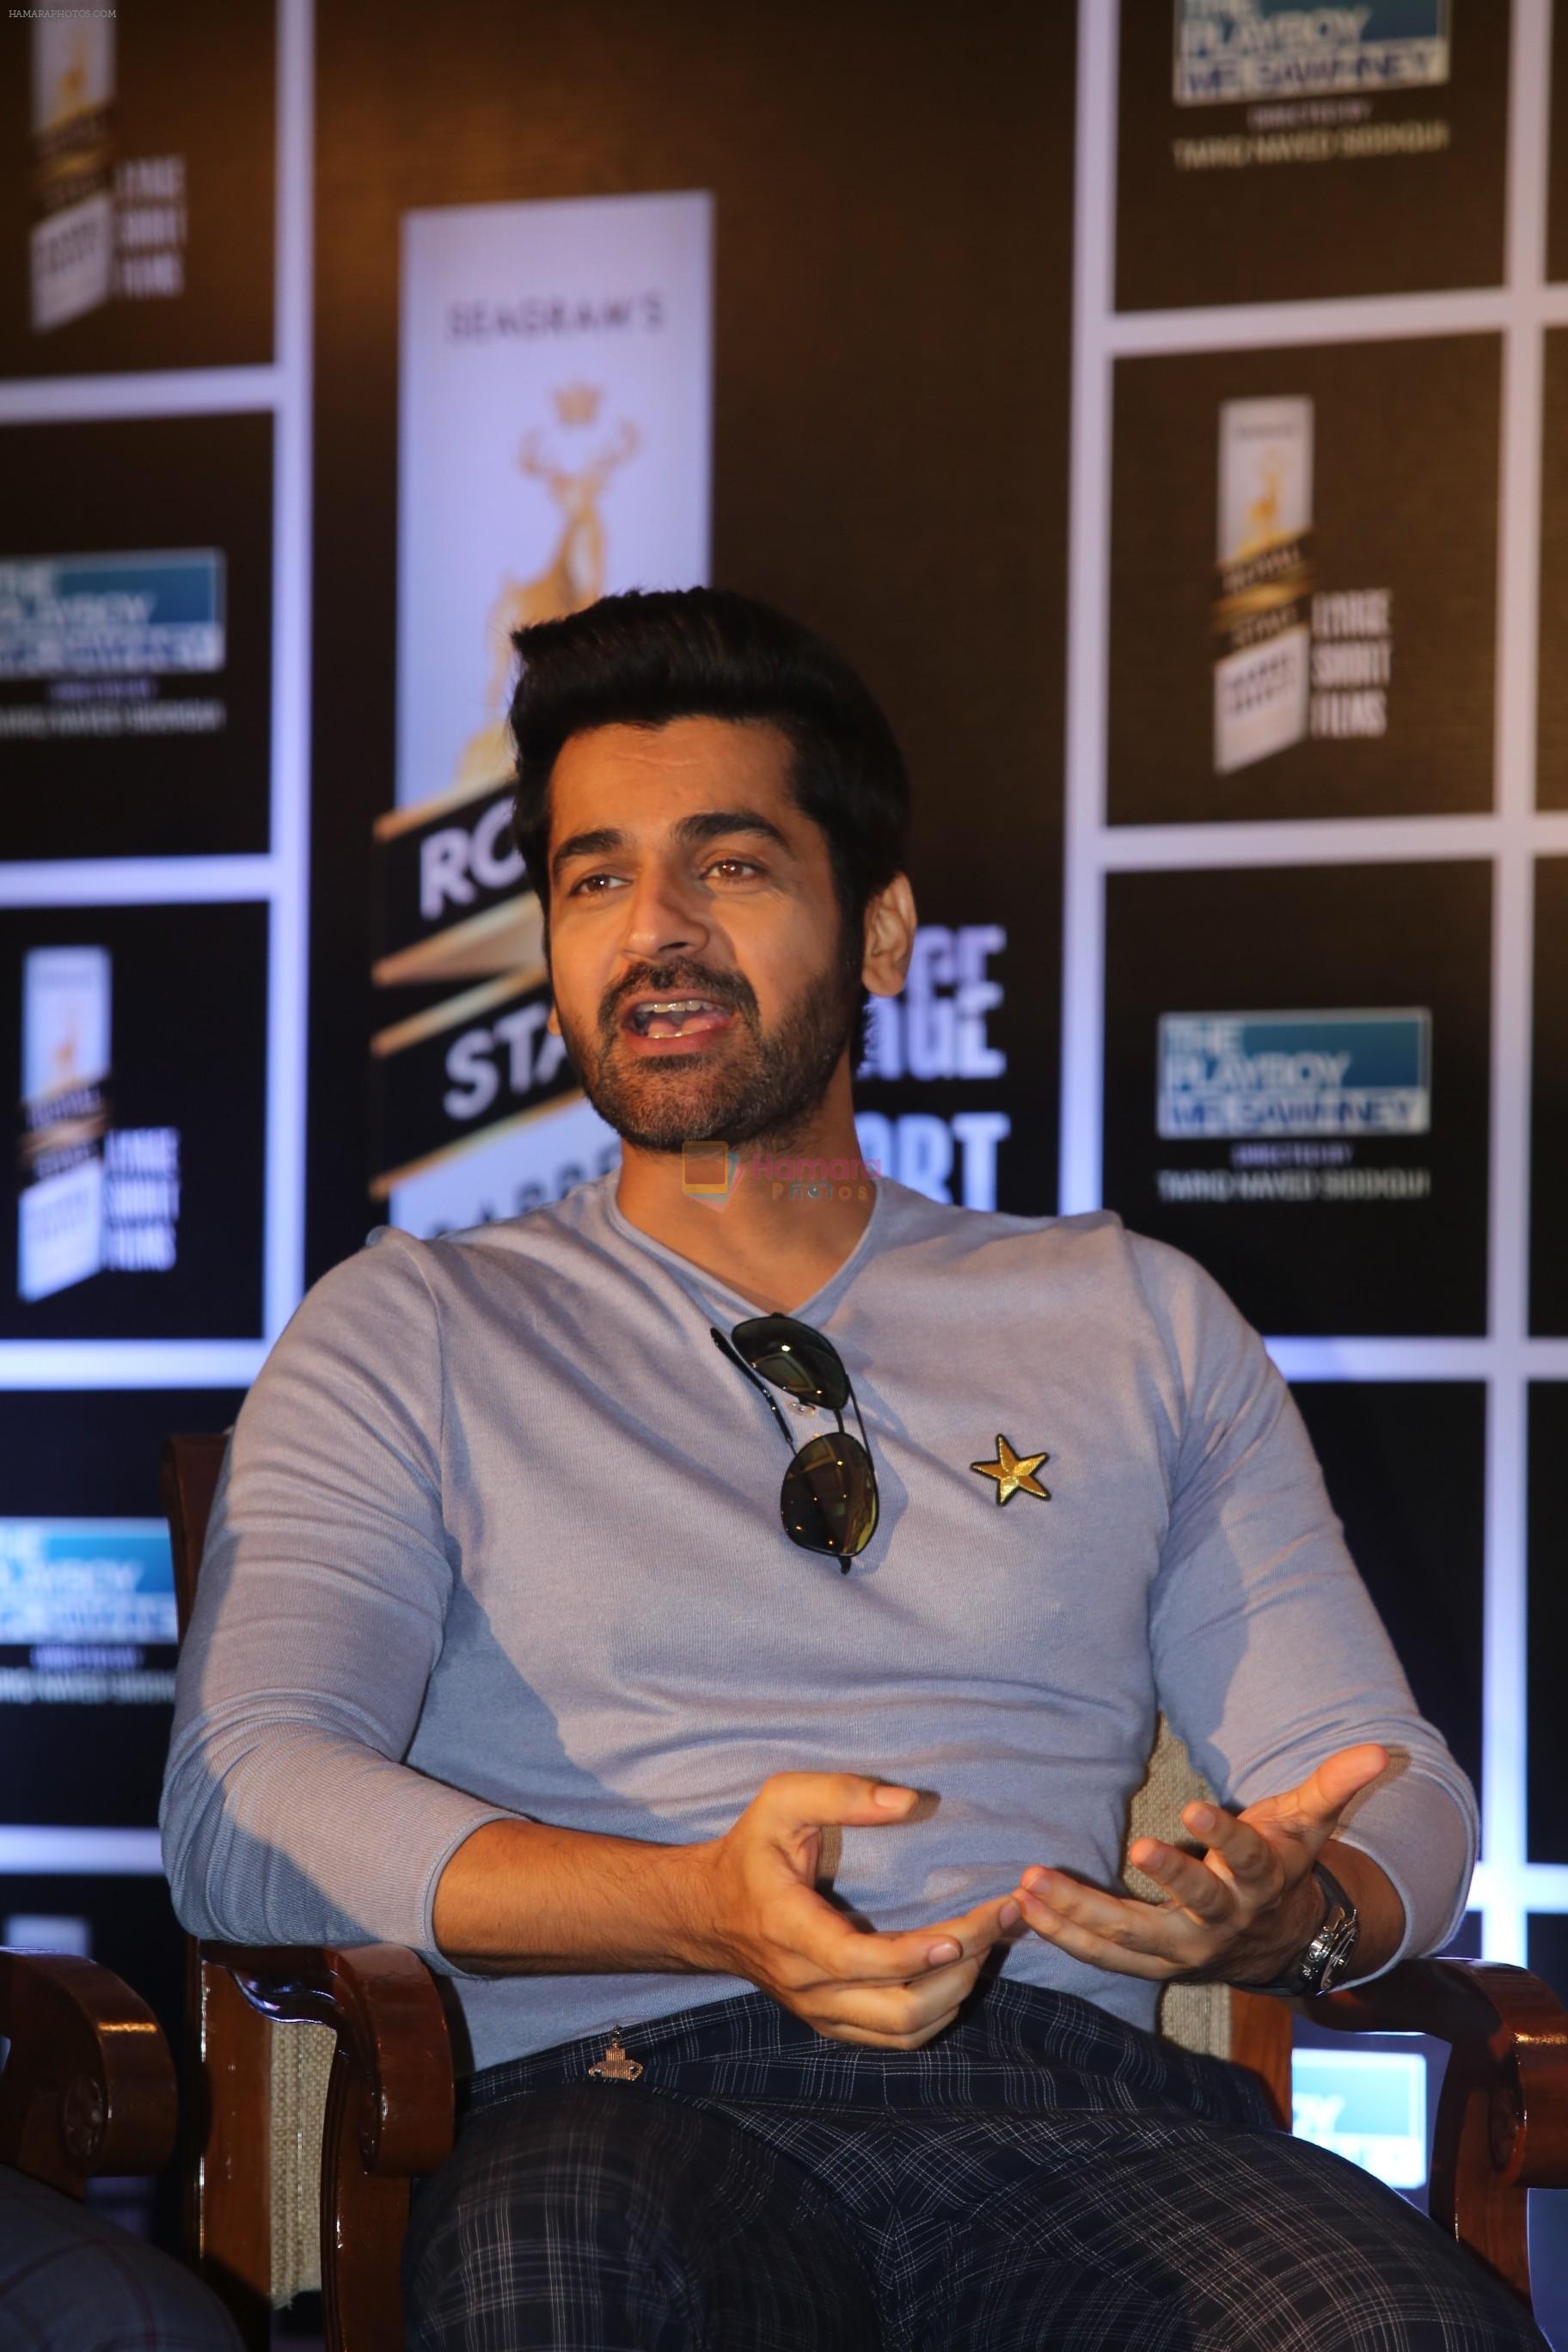 Arjan Bajwa at the Special screening of Royal Stag Large Short Films The Playboy Mr Sawhney in Taj Lands End bandra on 24th Oct 2018